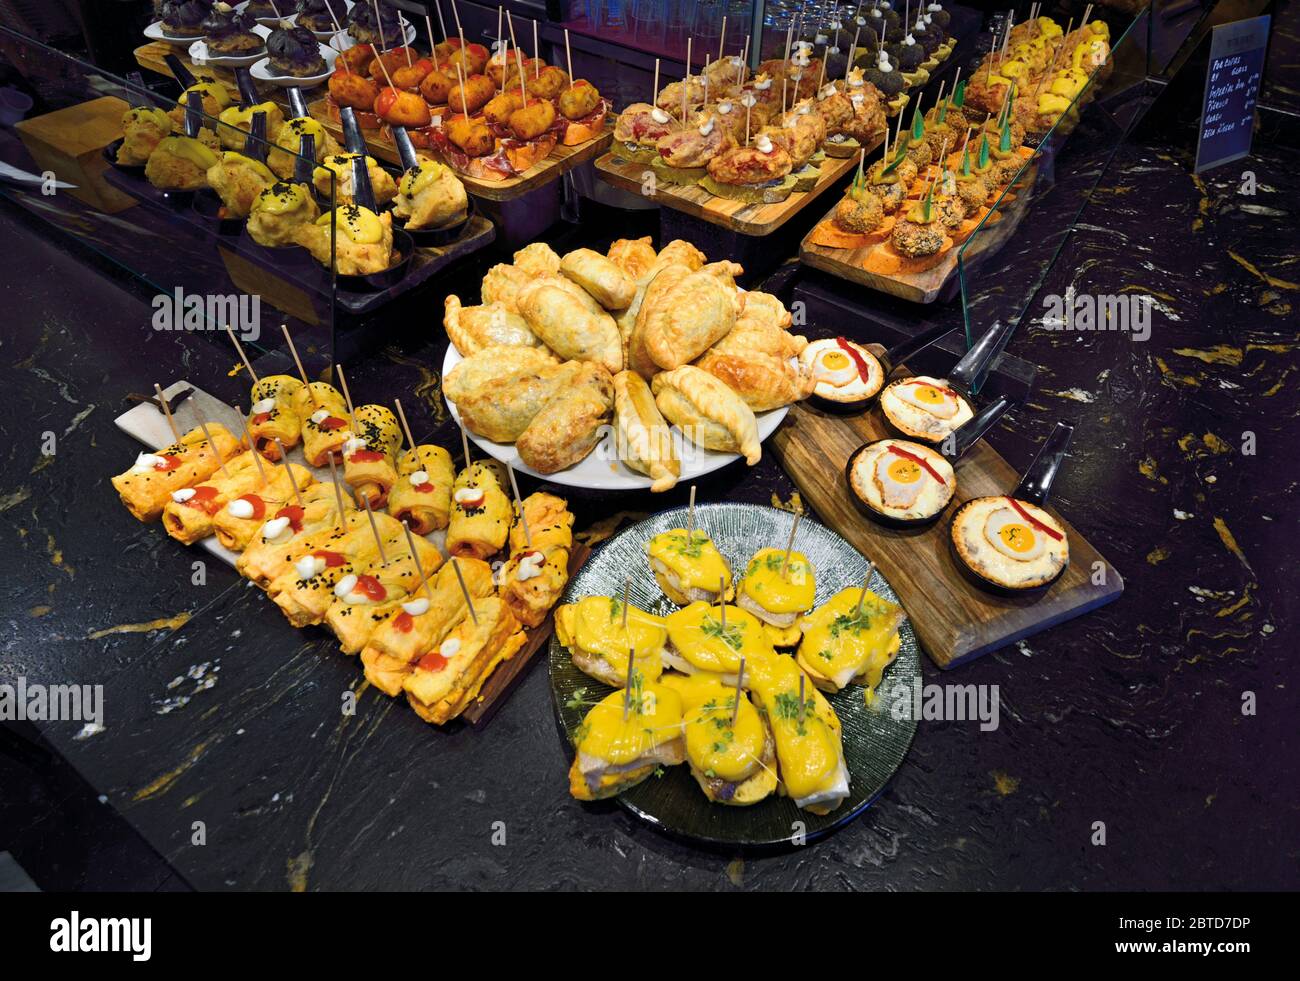 Variety of finger food and snacks (pintxos) in a typical basque pintxos bar Stock Photo